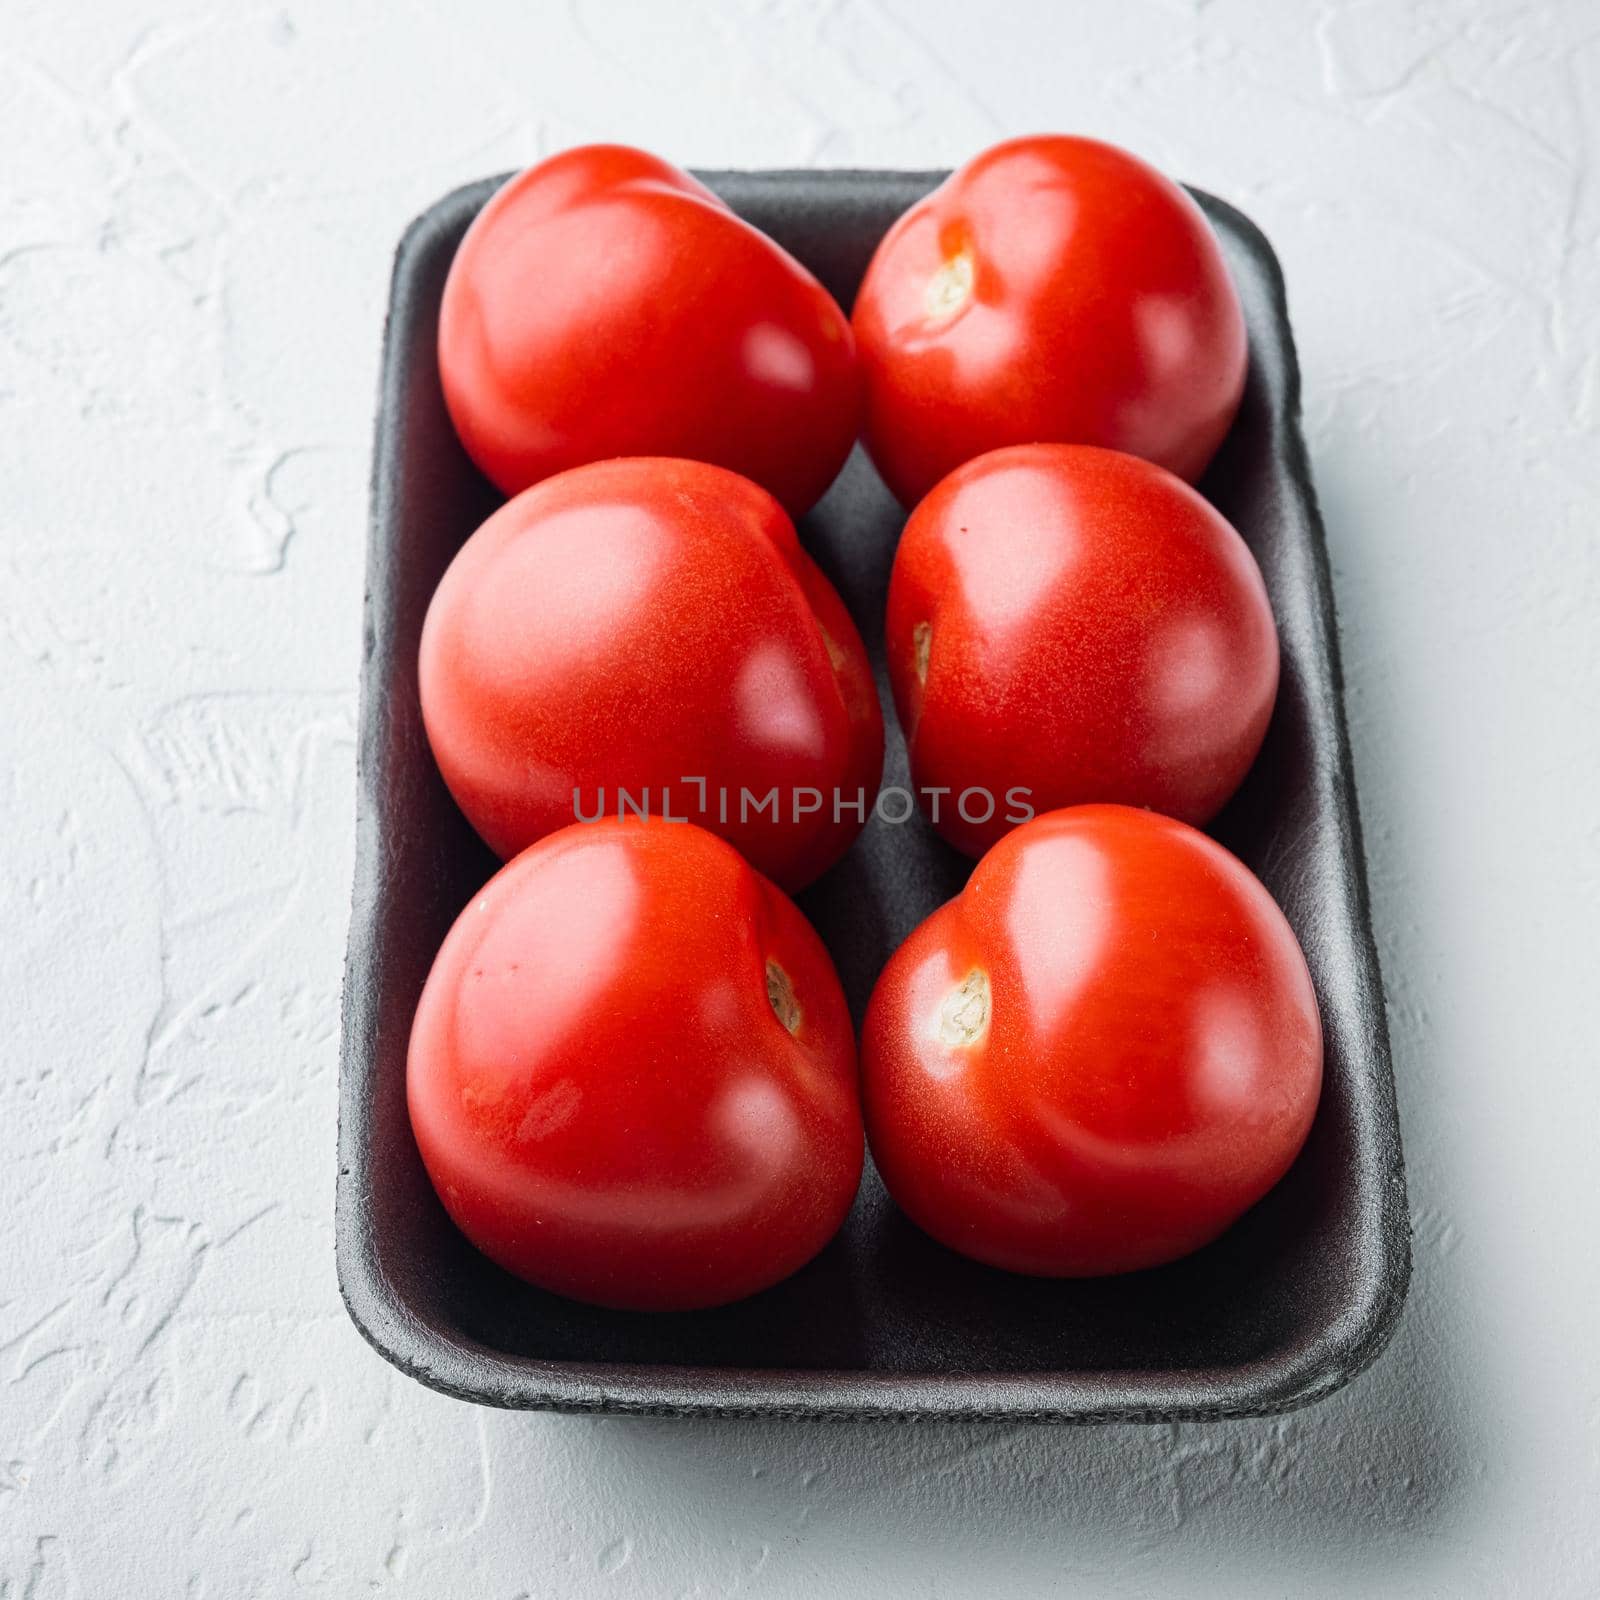 Red ripe tomatoes, on white background